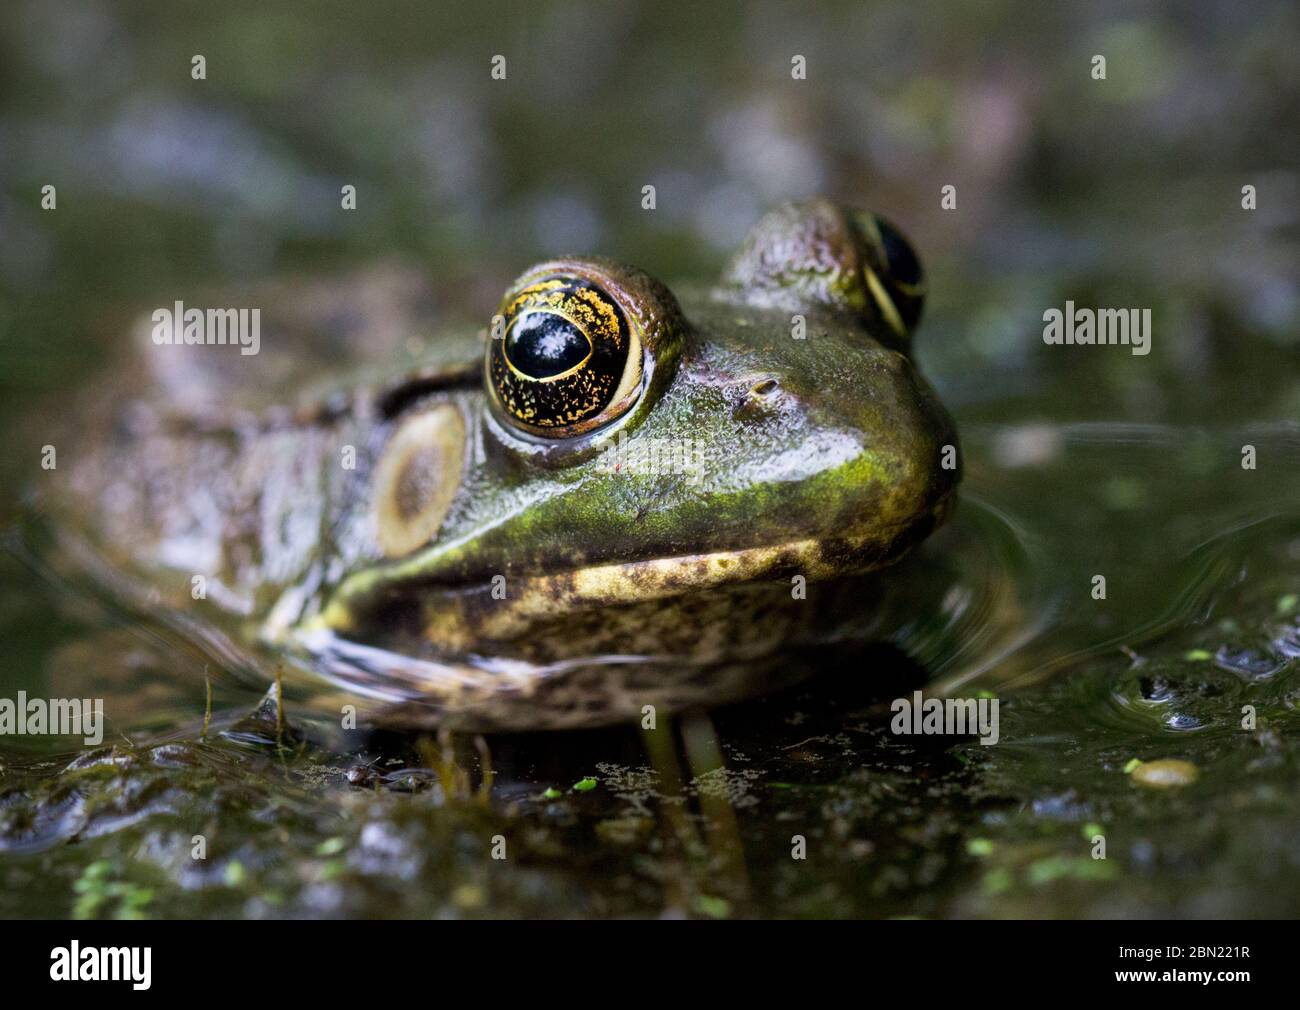 A male bullfrog (Lithobates catesbeianus or Rana catesbeiana) sits partially submerged in water in the Yale Preserve in Woodbridge, CT, USA Stock Photo